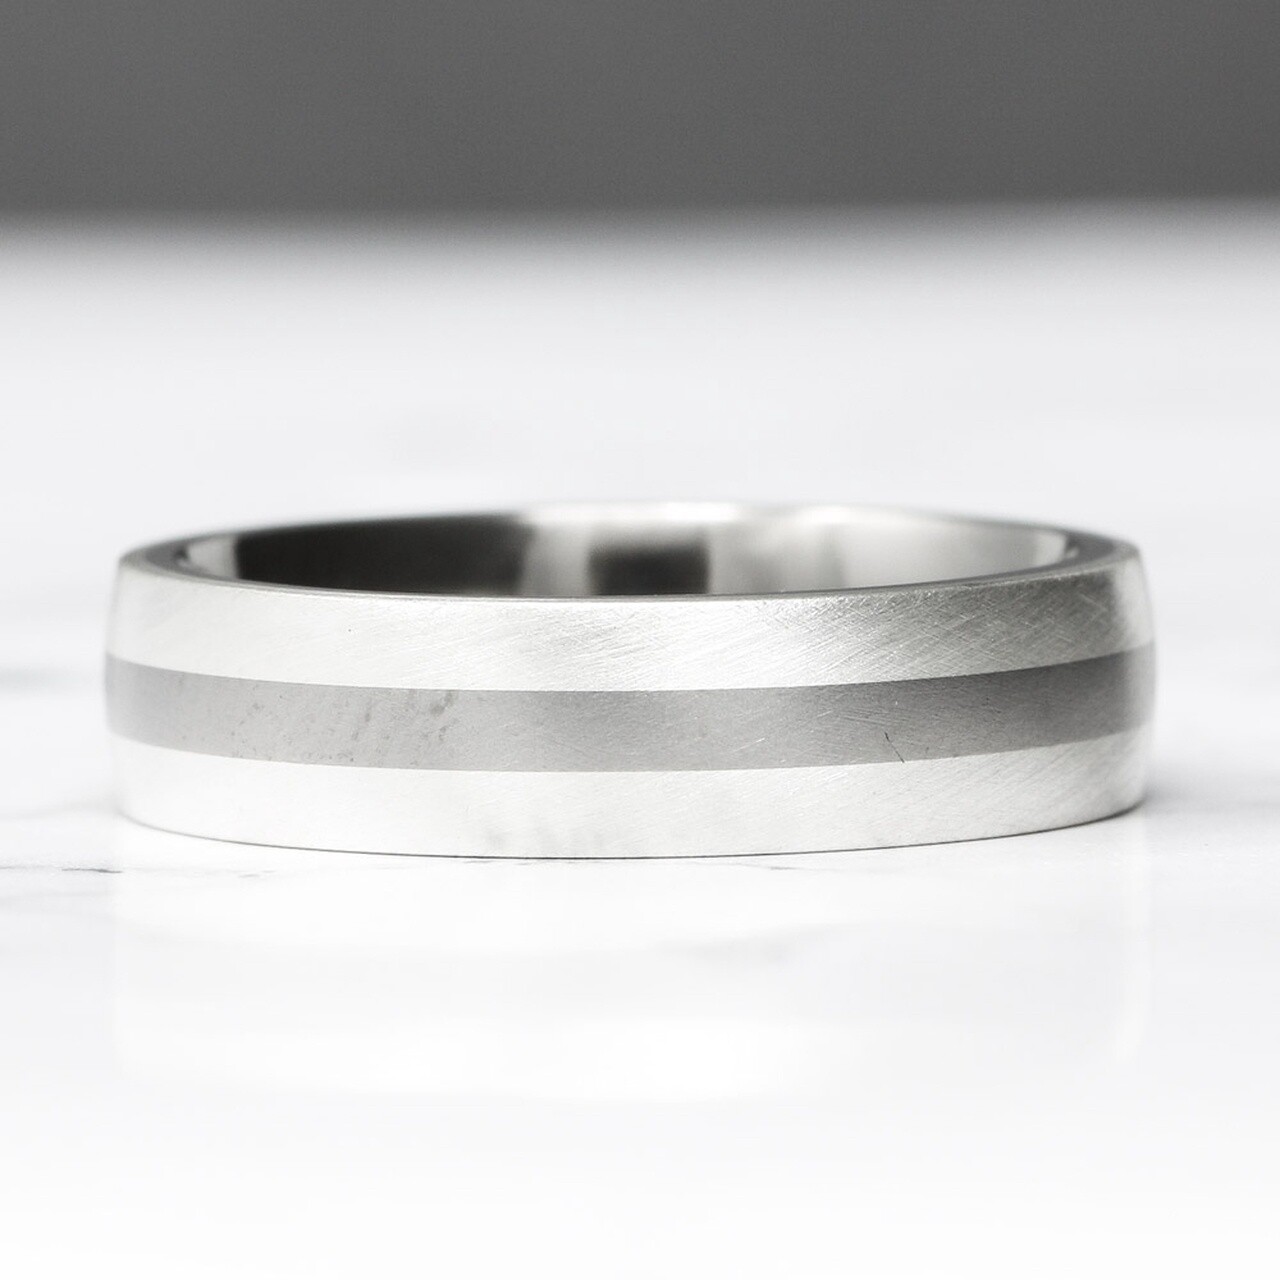 Sunspot Silver Sleeve Titanium Ring - 6mm by Prism Design